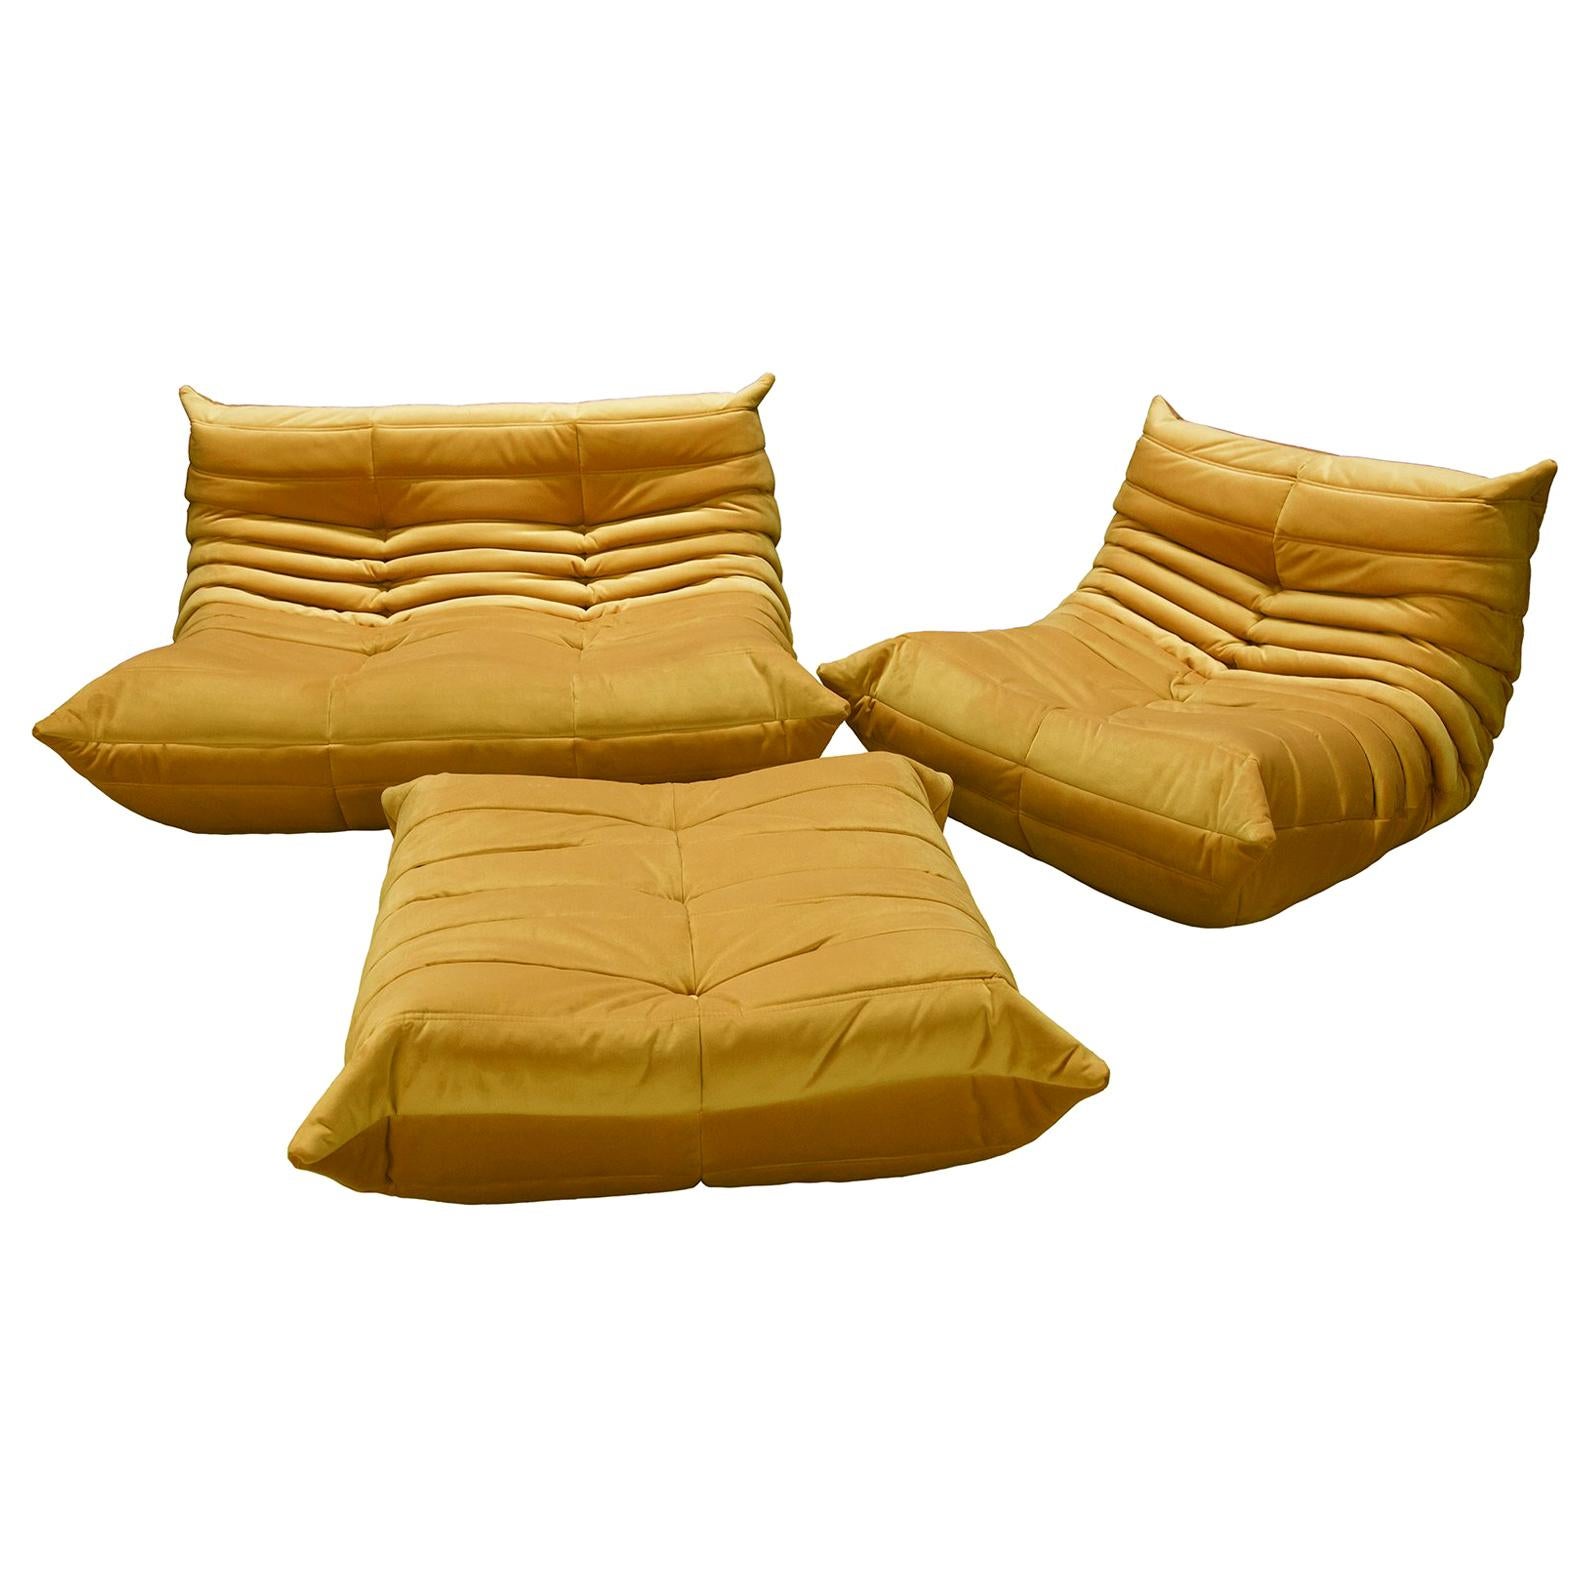 Three Piece Togo Set by Michel Ducaroy Manufactured by Ligne Roset in France For Sale